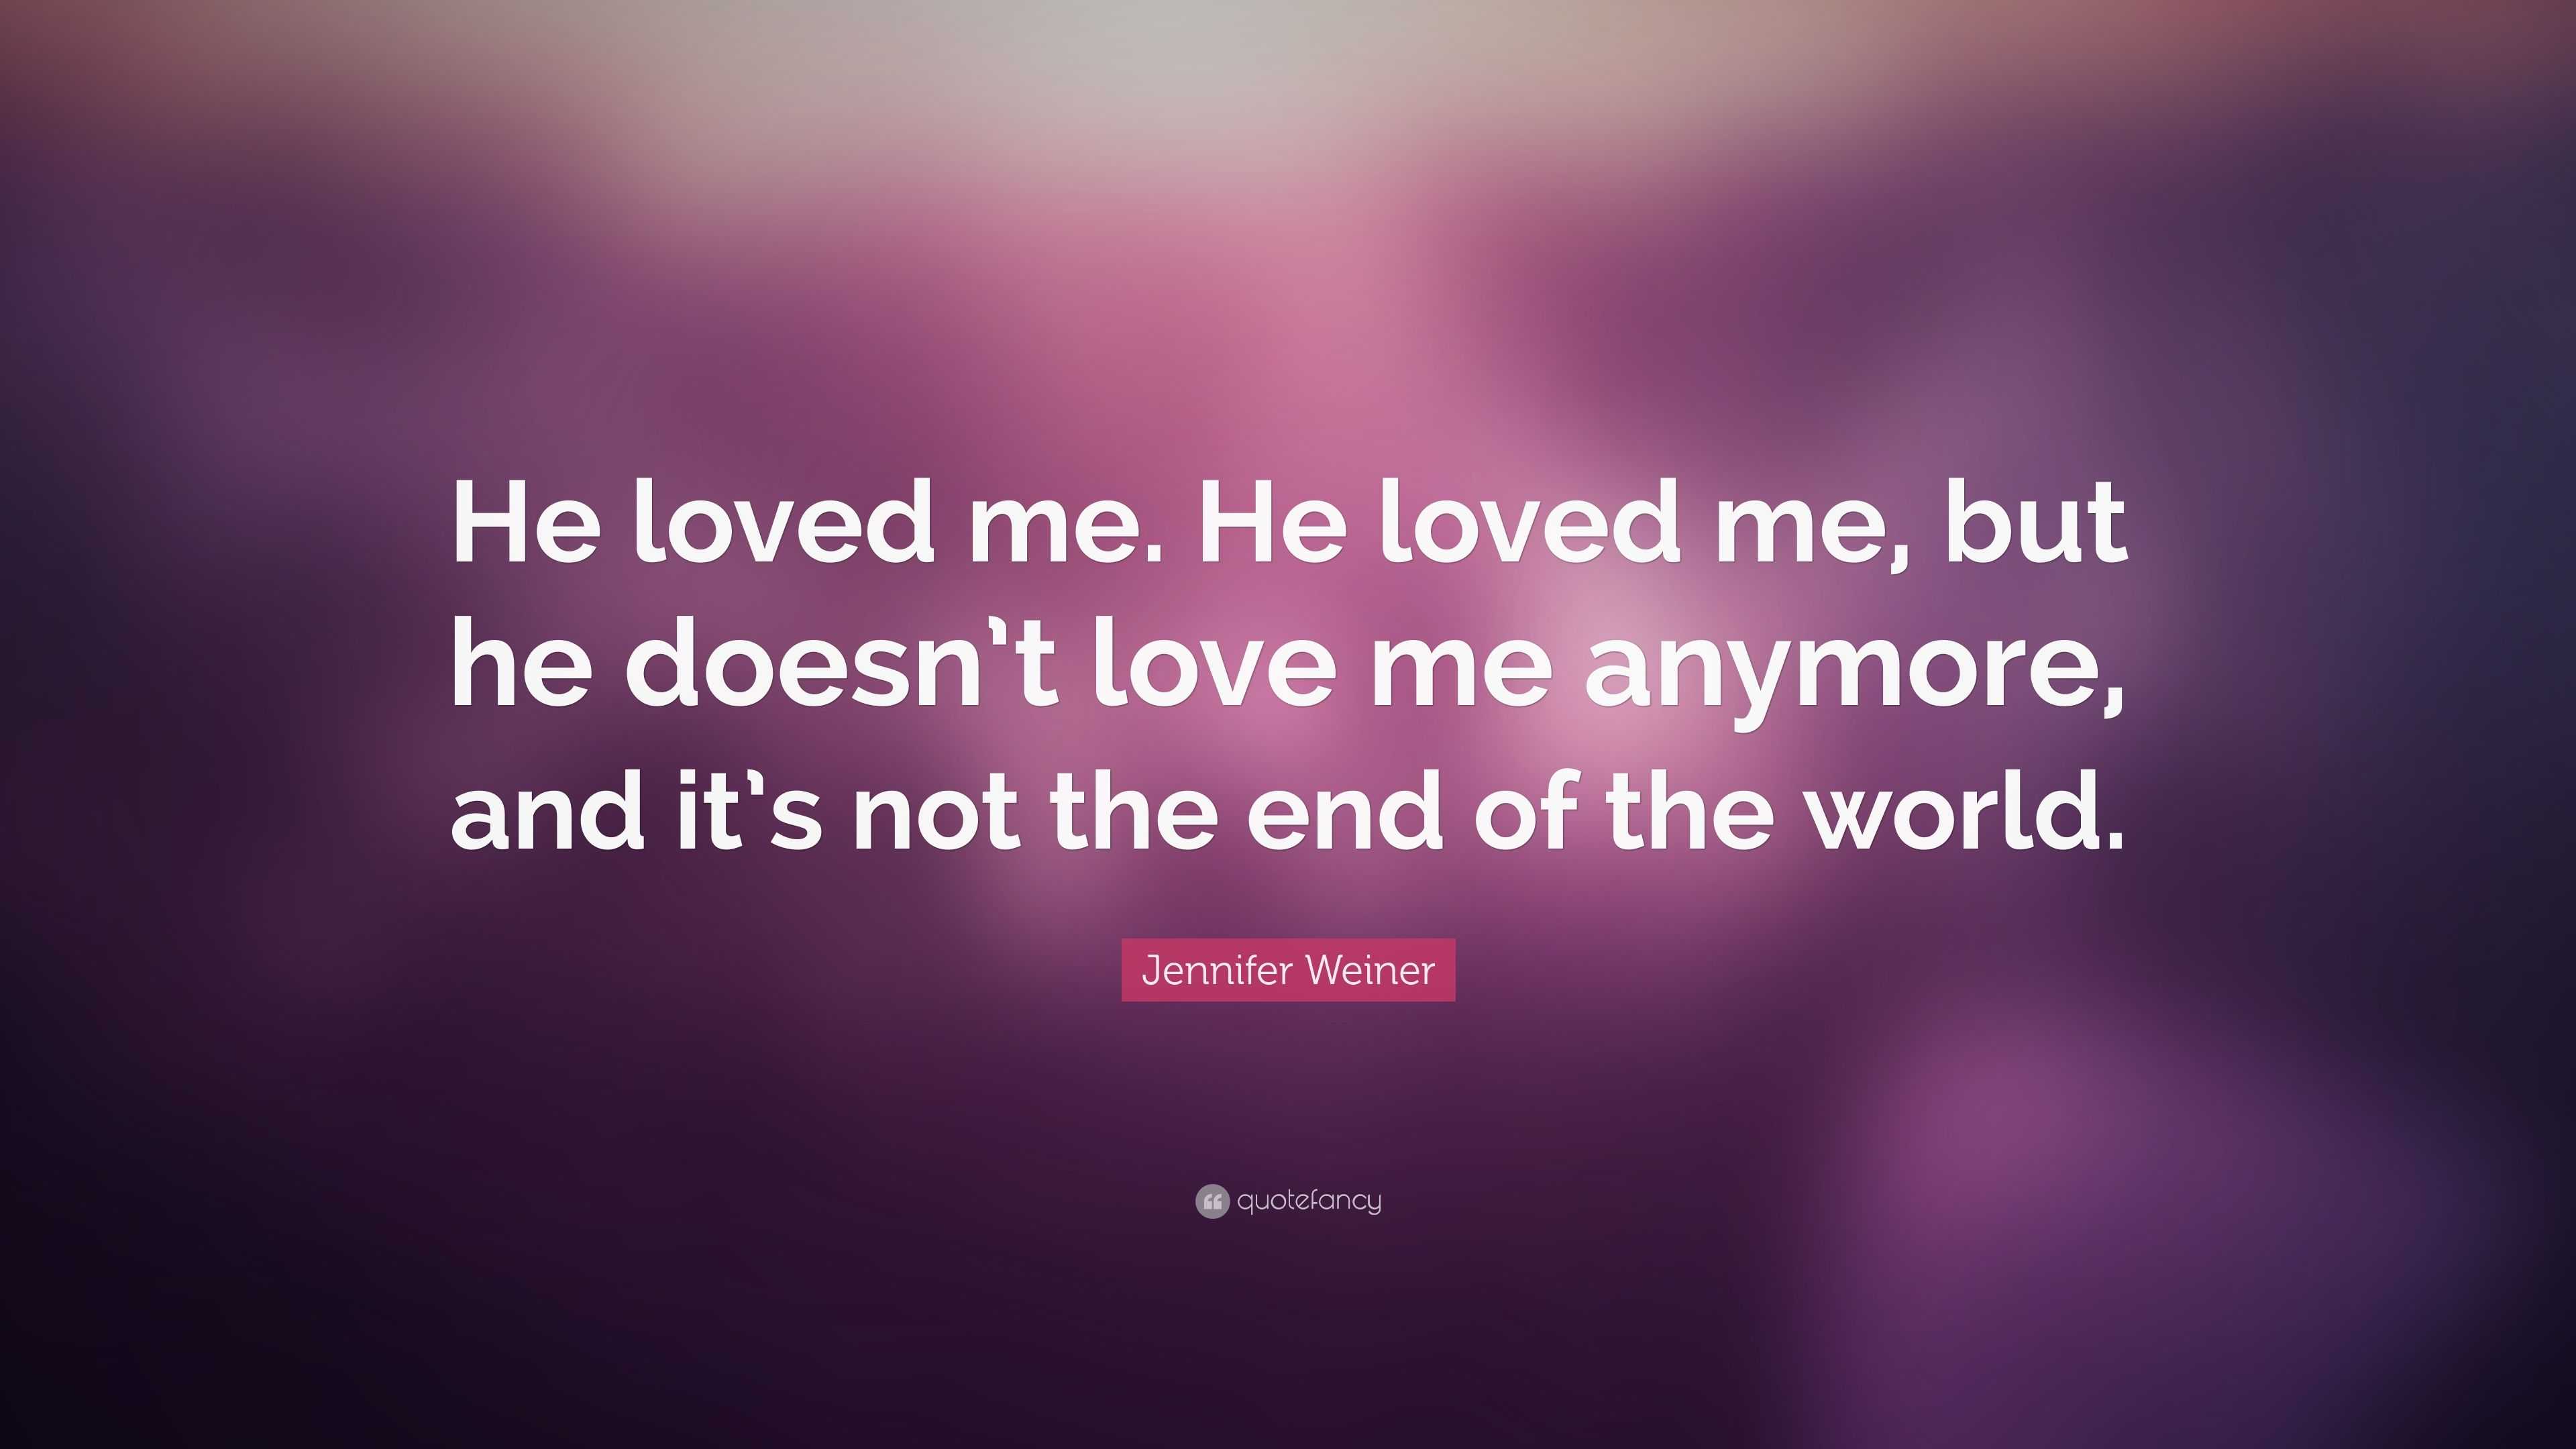 Jennifer Weiner Quote “He loved me He loved me but he doesn